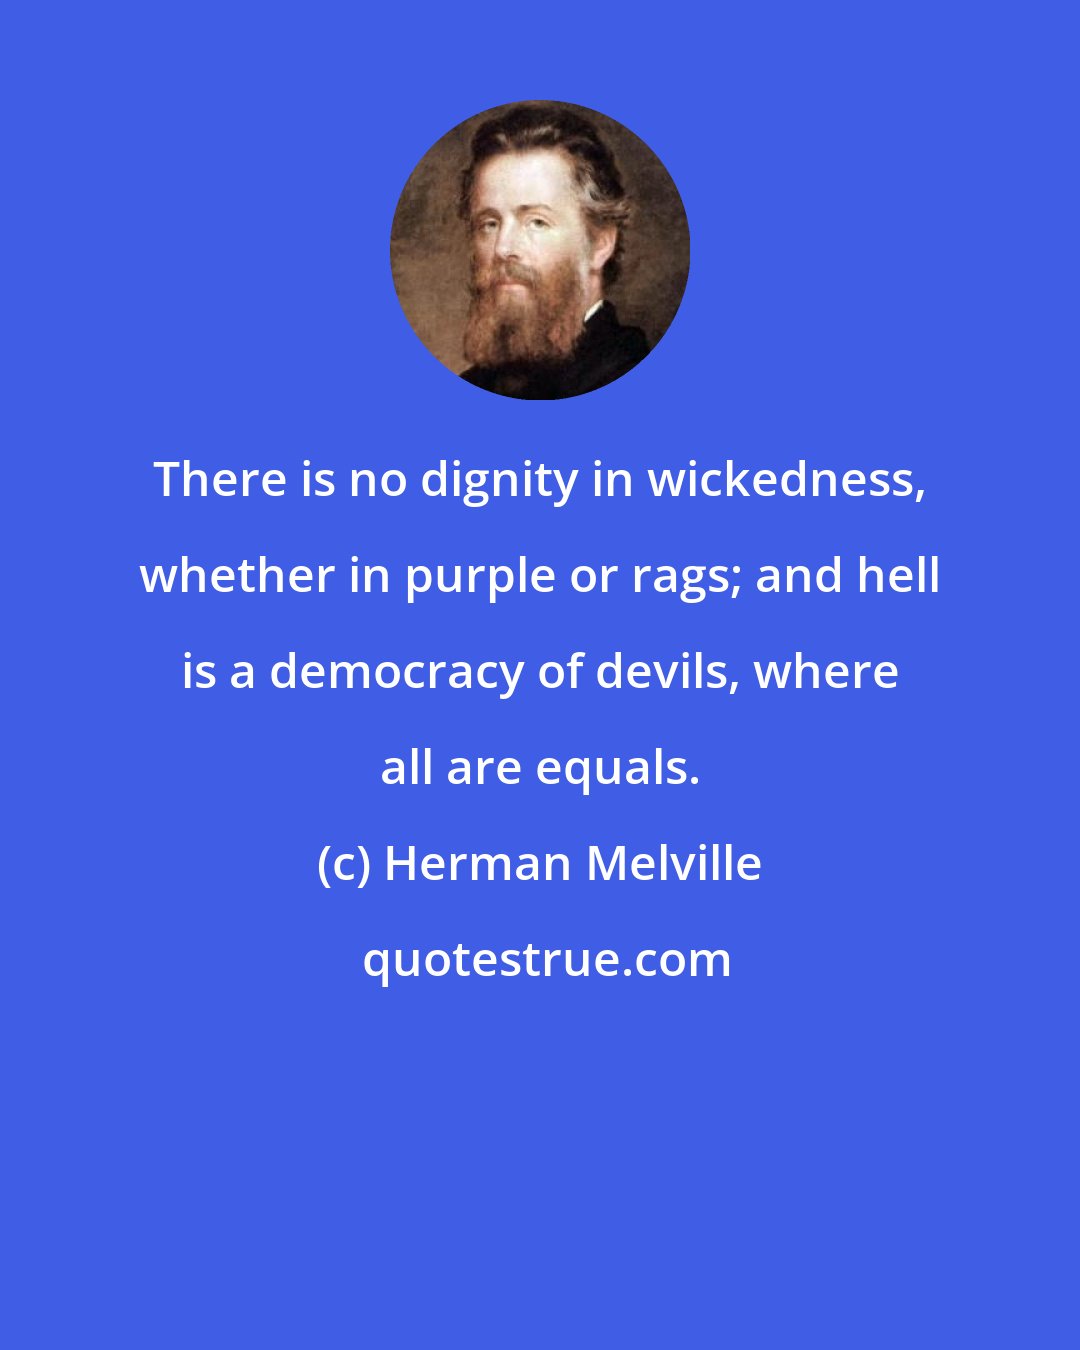 Herman Melville: There is no dignity in wickedness, whether in purple or rags; and hell is a democracy of devils, where all are equals.